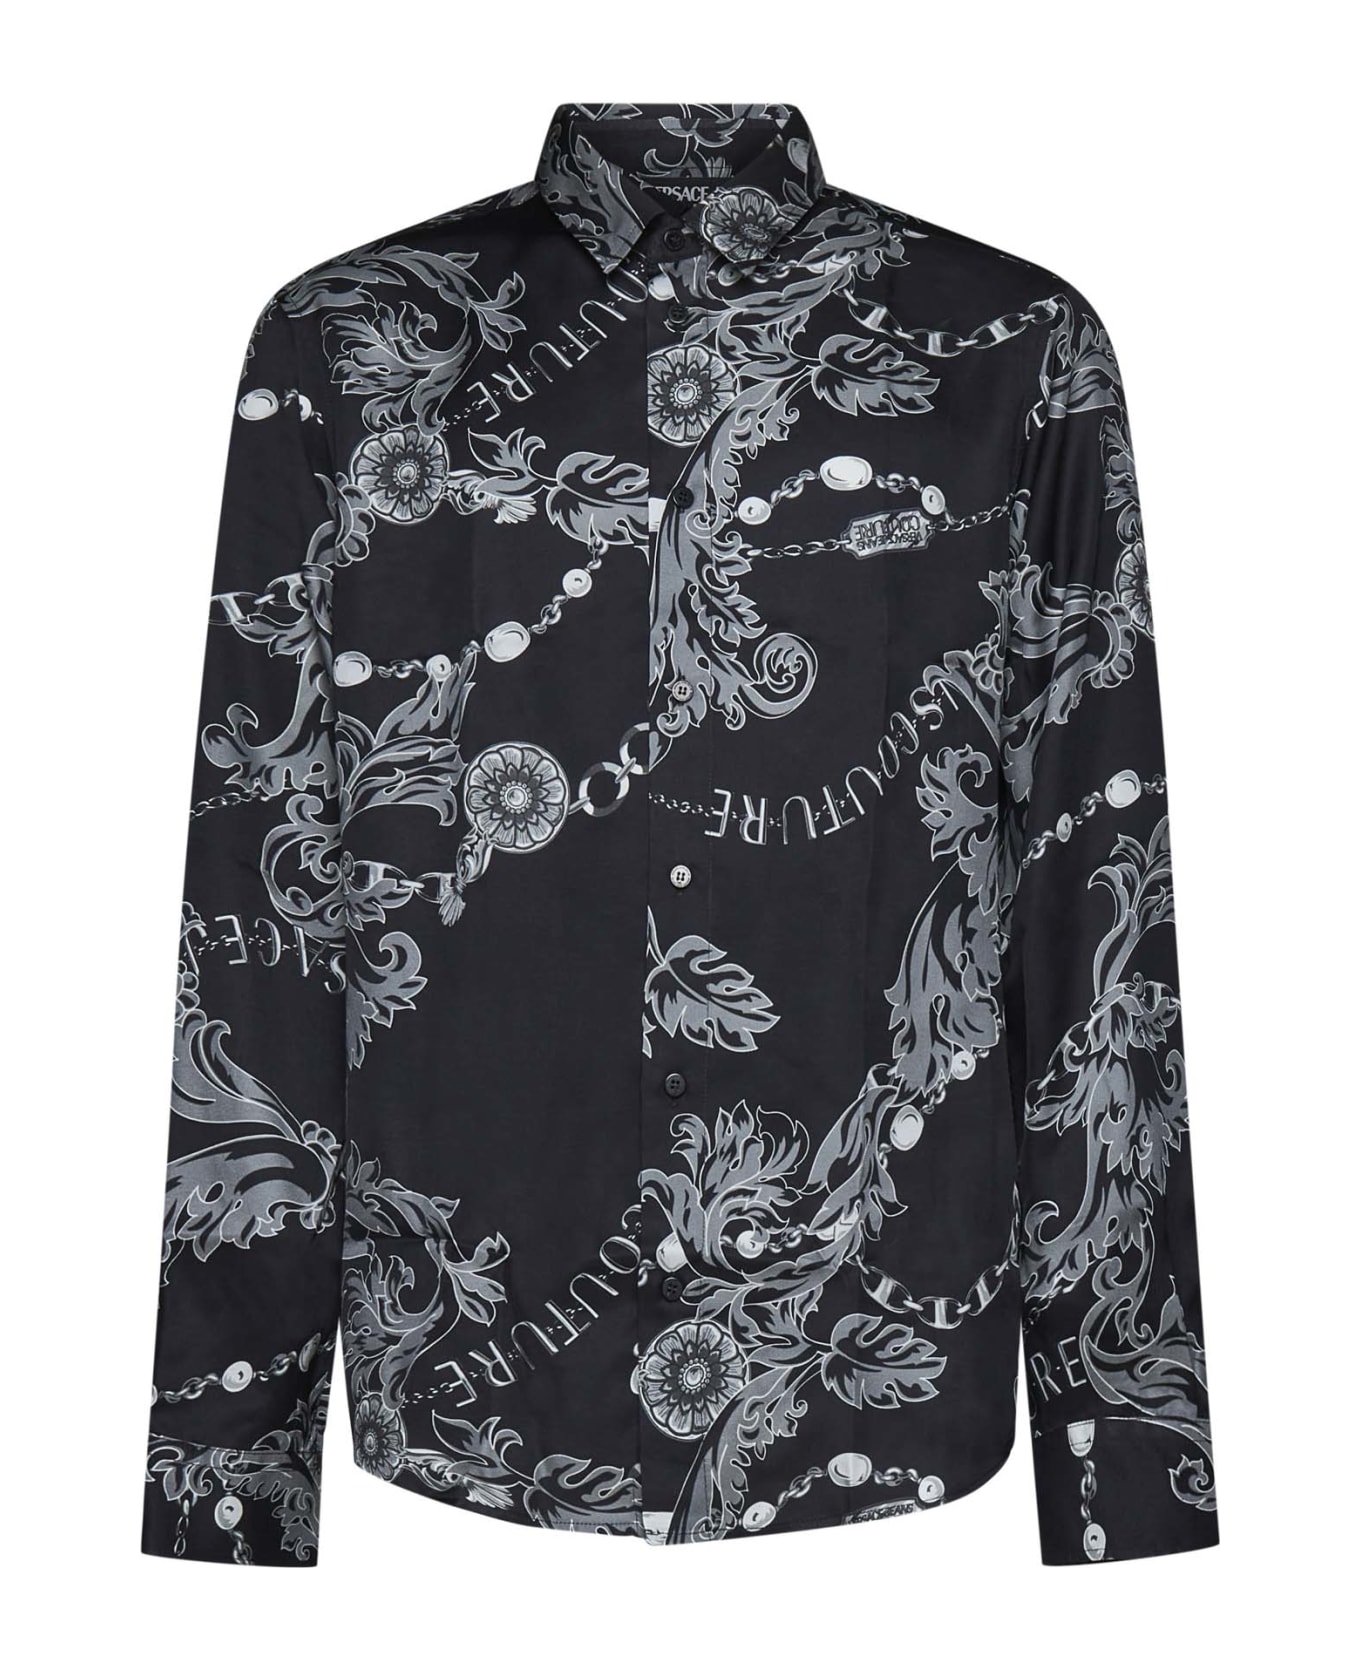 Versace Jeans Couture Chain Couture Print Shirt - Black